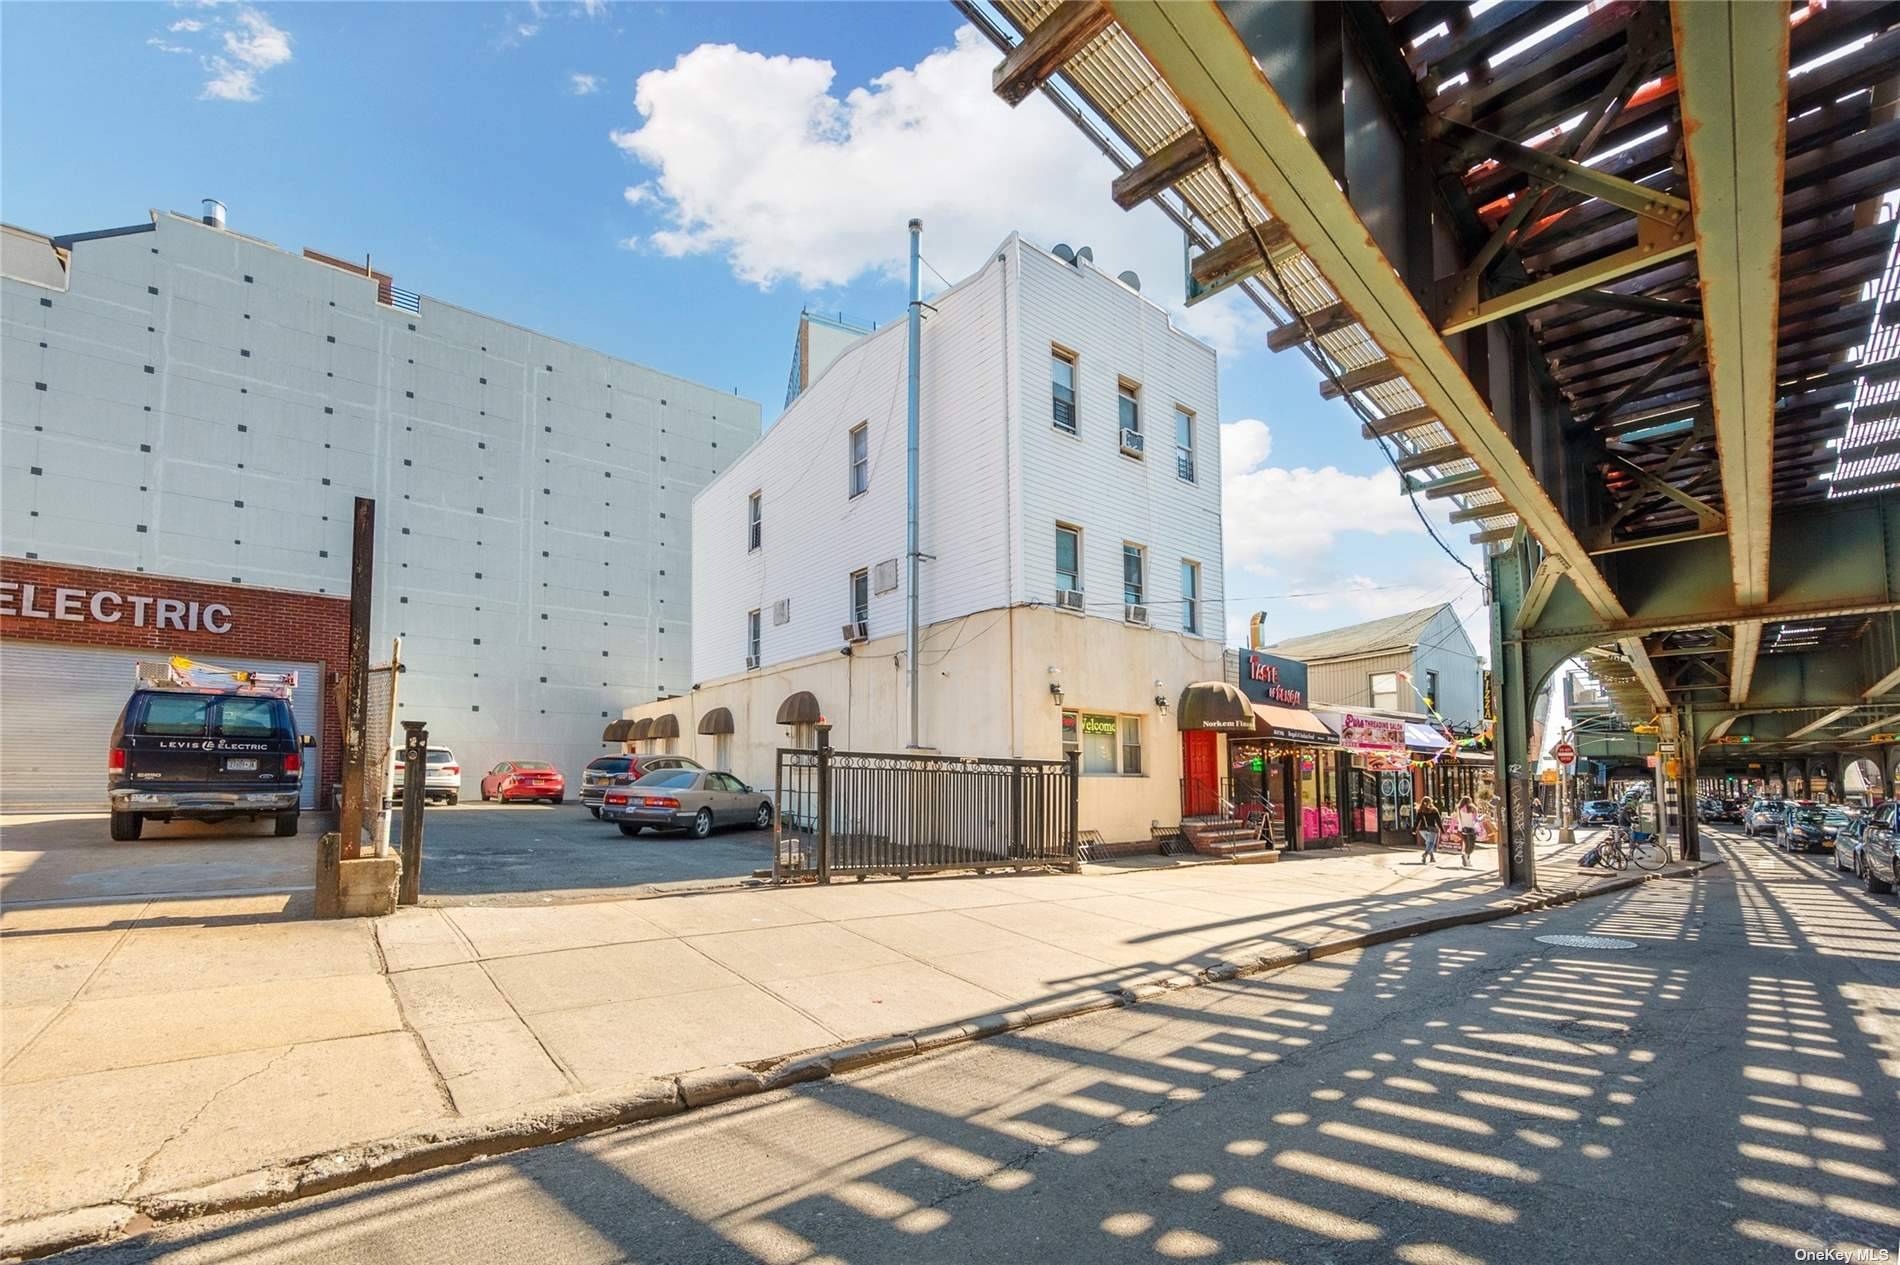 Rare opportunity to purchase this 3000 SF Mixed Use building strategically located on high traffic street between 28th Road and Newton Avenue, around the block from Athens Square Park.